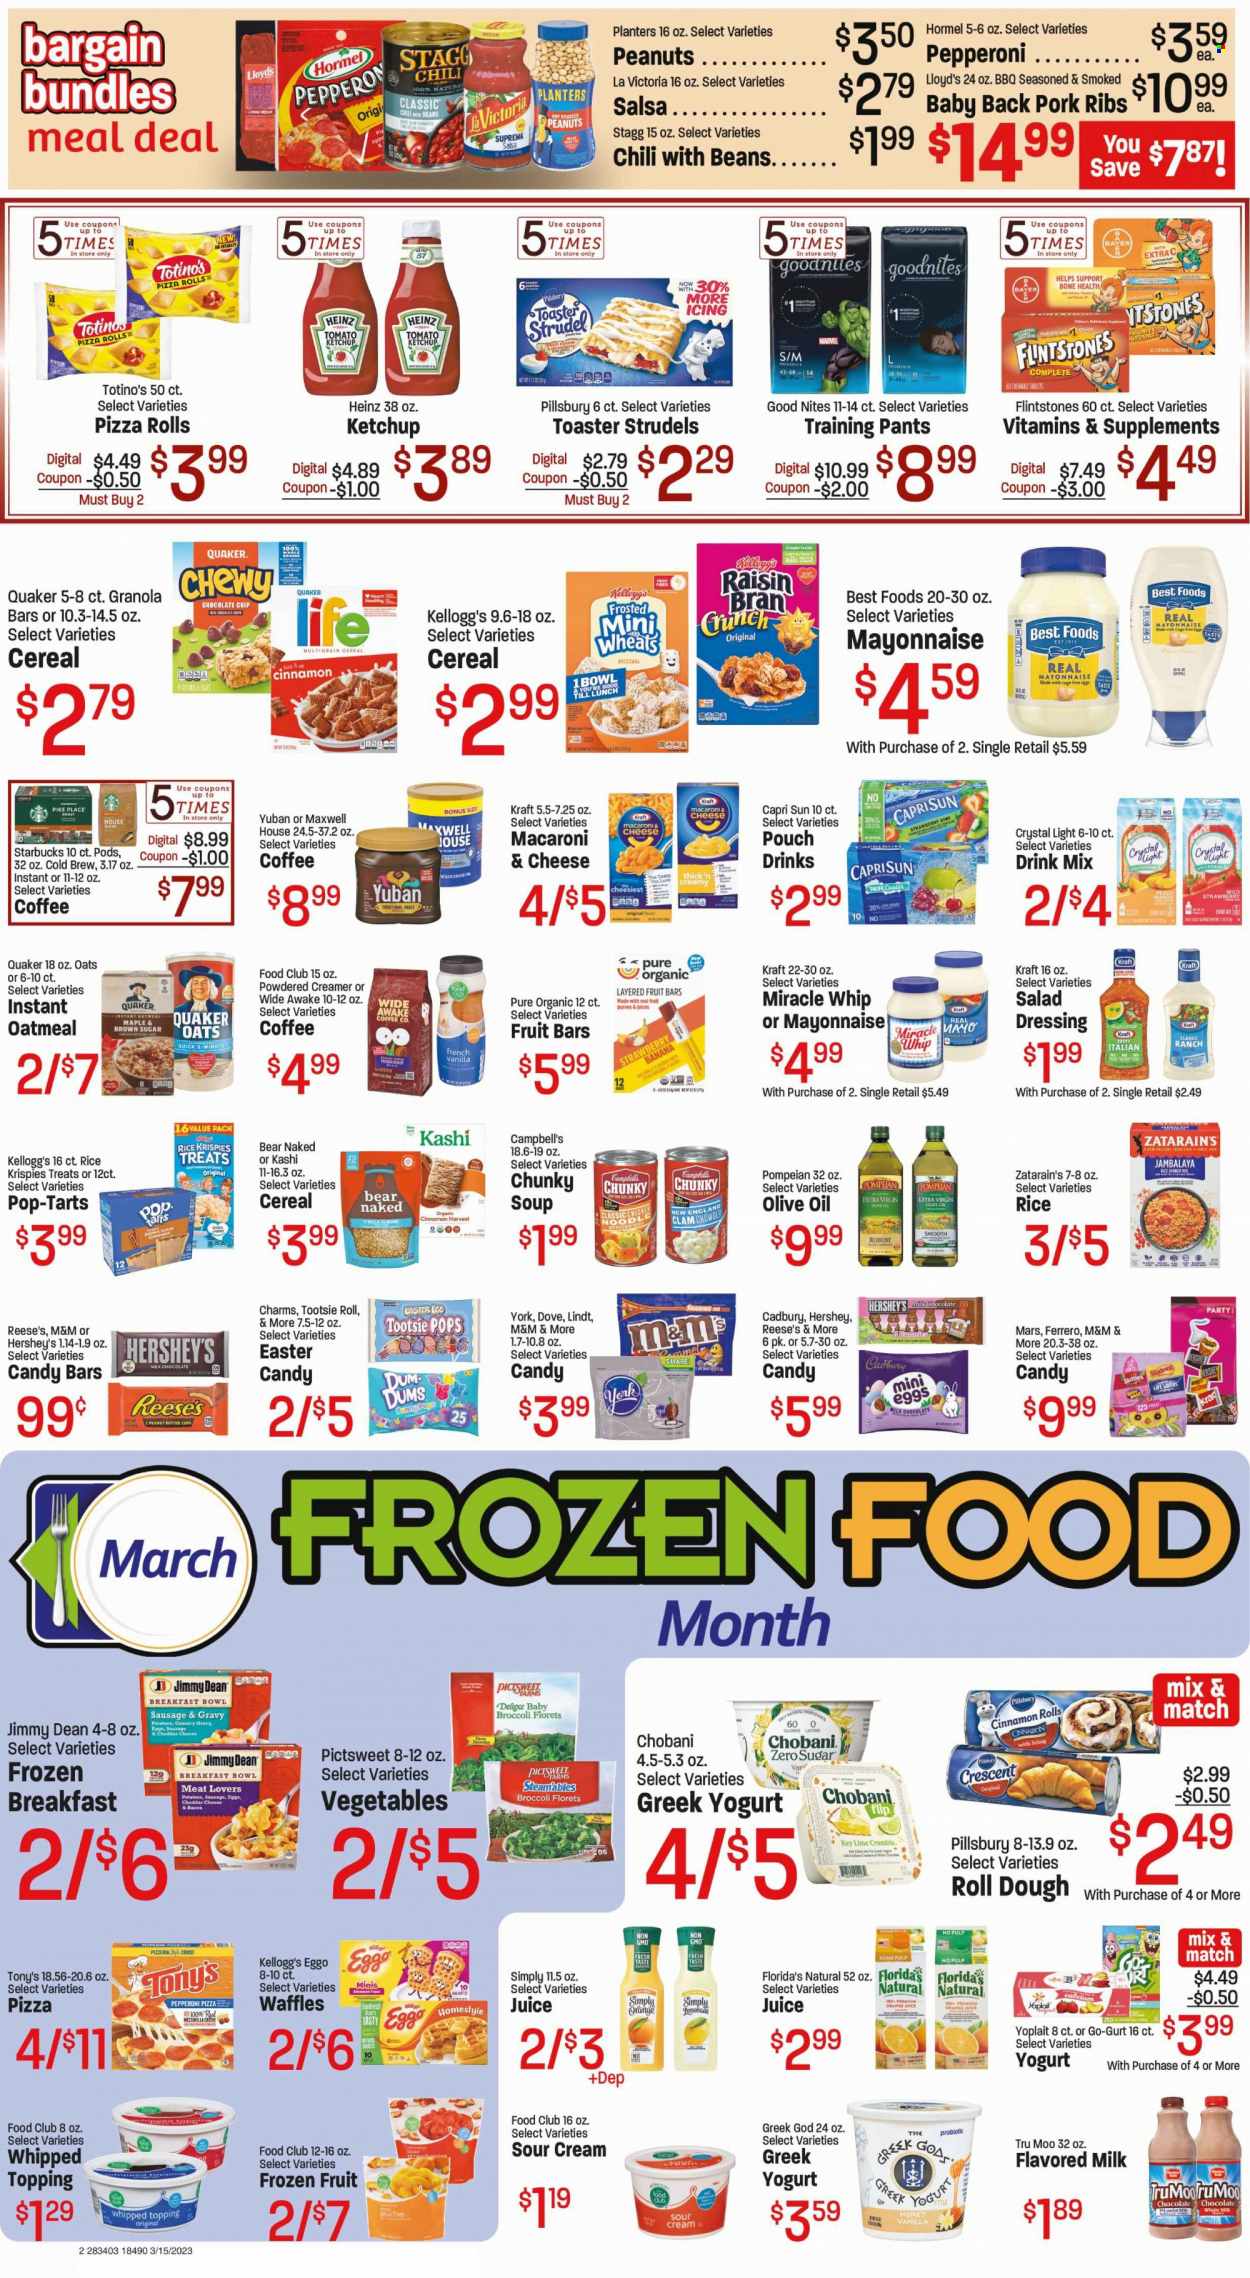 thumbnail - Red Apple Marketplace Flyer - 03/15/2023 - 03/28/2023 - Sales products - pizza rolls, strudel, cinnamon roll, waffles, broccoli, strawberries, Campbell's, macaroni & cheese, pizza, soup, breakfast bowl, Pillsbury, Quaker, noodles, Kraft®, Jimmy Dean, Hormel, roast, bacon, sausage, pepperoni, greek yoghurt, yoghurt, Yoplait, Chobani, flavoured milk, cage free eggs, sour cream, creamer, mayonnaise, Miracle Whip, Reese's, Hershey's, Dove, milk chocolate, chocolate chips, Lindt, Ferrero Rocher, Mars, easter egg, M&M's, Kellogg's, Cadbury, Skittles, peanut butter cups, Pop-Tarts, Florida's Natural, cane sugar, oatmeal, oats, topping, Heinz, clam chowder, cereals, granola bar, Rice Krispies, Raisin Bran, salad dressing, ketchup, dressing, salsa, extra virgin olive oil, olive oil, oil, honey, roasted peanuts, peanuts, Planters, Capri Sun, juice, Maxwell House, coffee, Starbucks, ribs, pork meat, pork ribs, pork back ribs, pants, baby pants, peaches. Page 2.